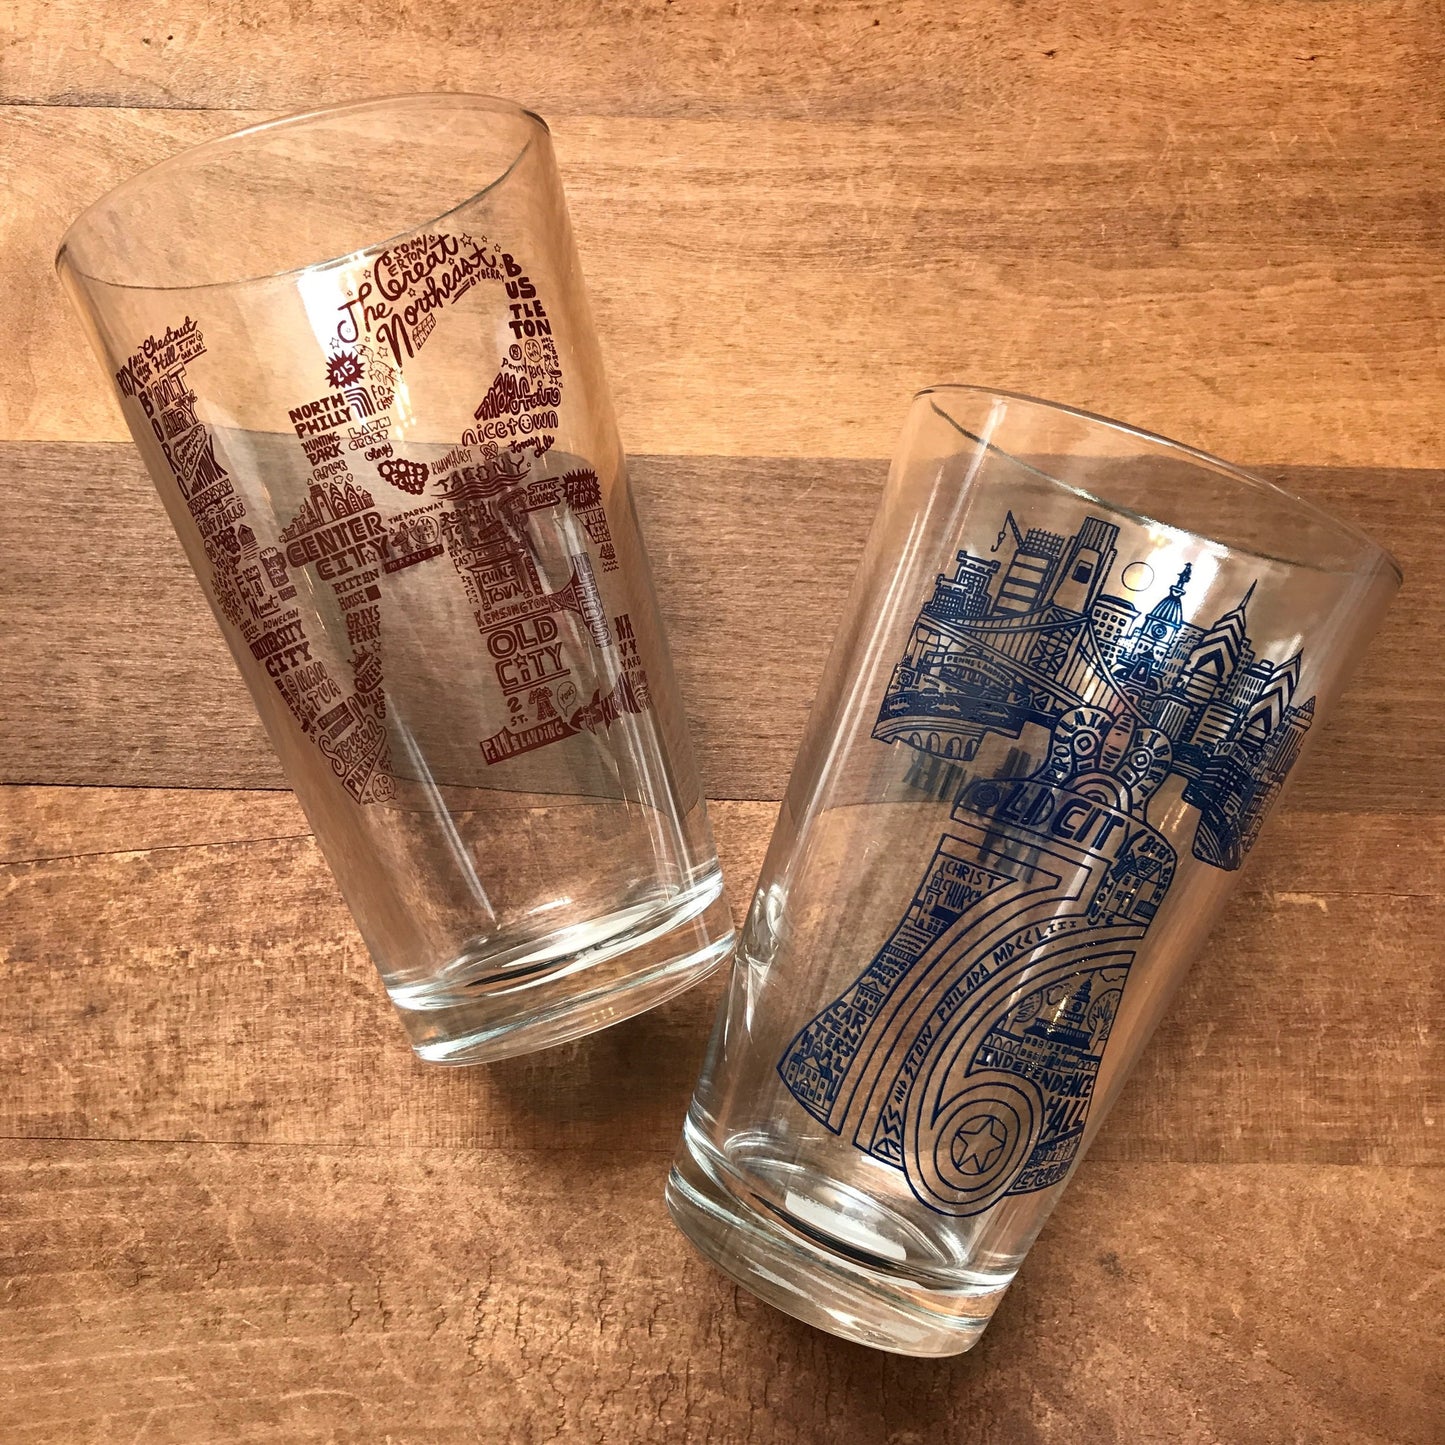 Two Philly Pint Glasses with Philadelphia-themed skyline illustrations on a wooden surface by Paul Carpenter.